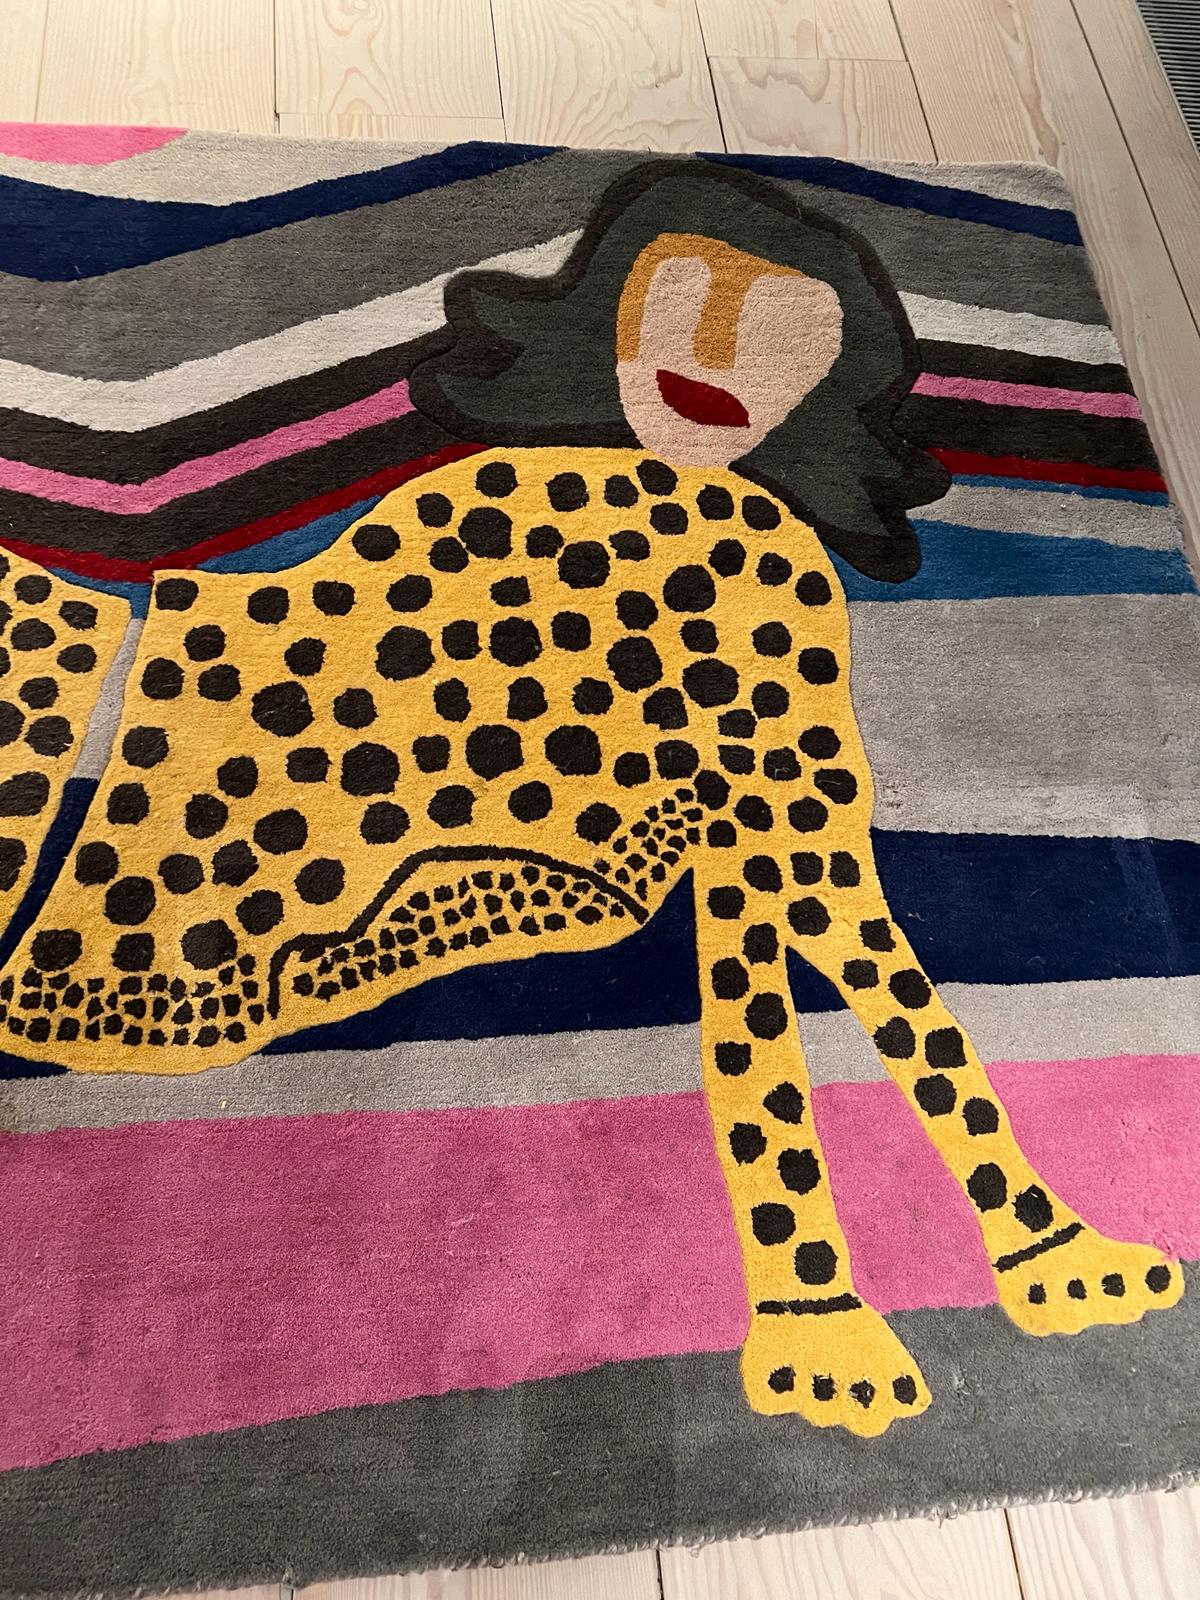 "Tiger Lady" hand woven rug, 100% wool by Joanne Hynes 160cm x 230cm - Image 2 of 9